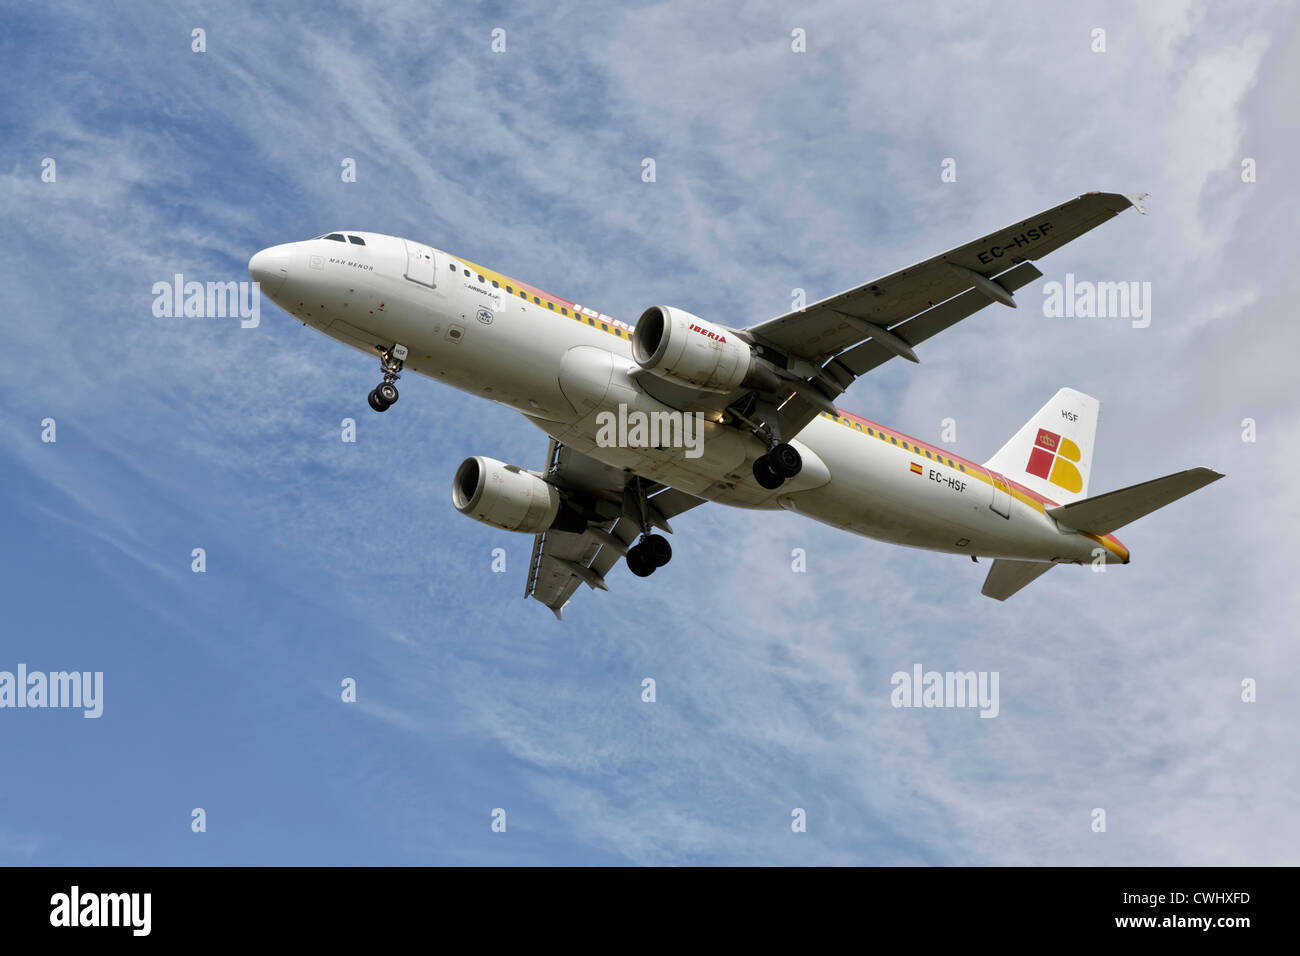 An Airbus A320 of the Spanish airline Iberia of final approach Stock Photo